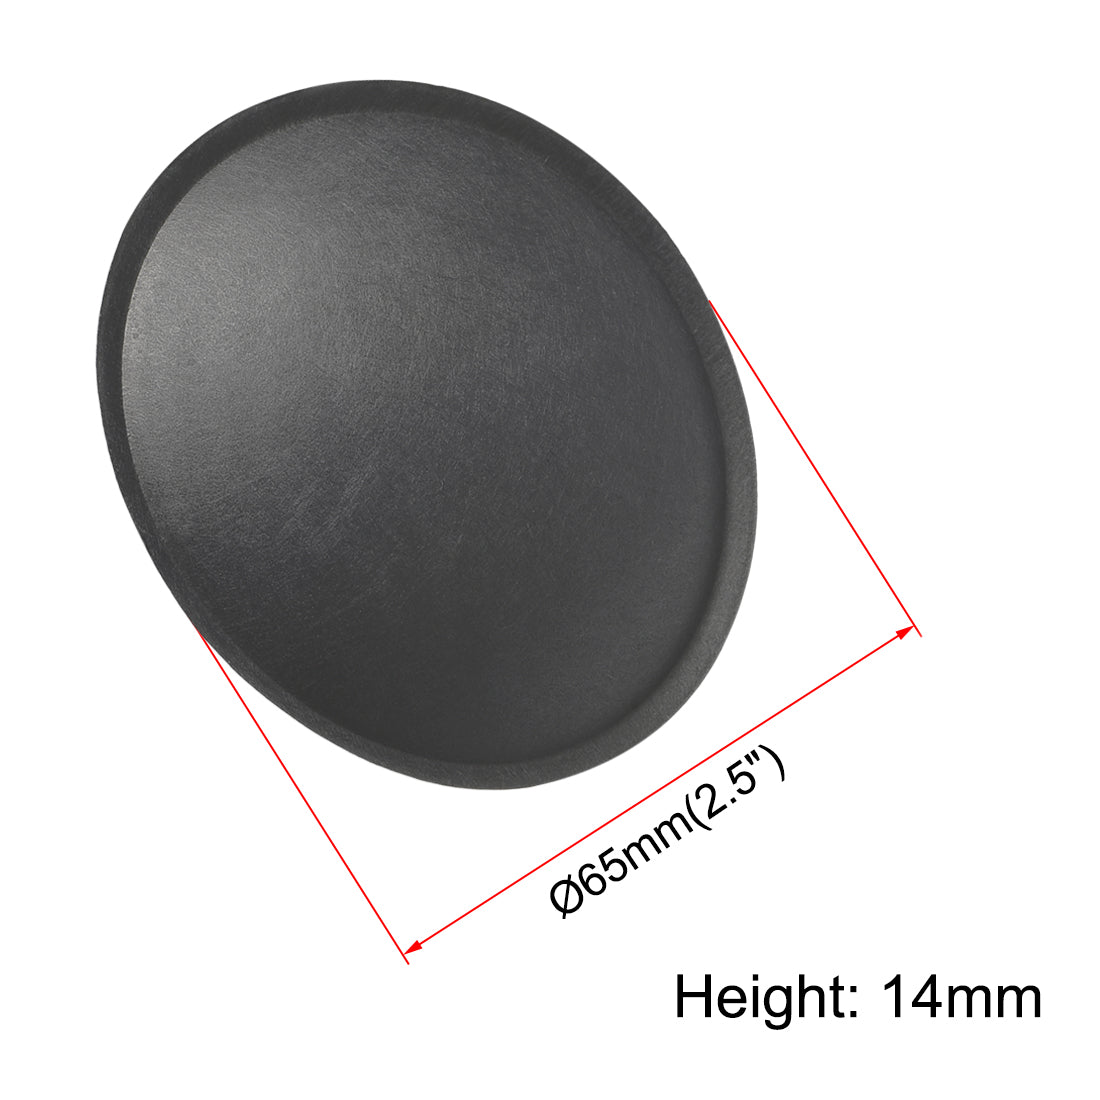 uxcell Uxcell Speaker Dust Cap 65mm/2.5" Diameter Subwoofer Paper Dome Coil Cover Caps